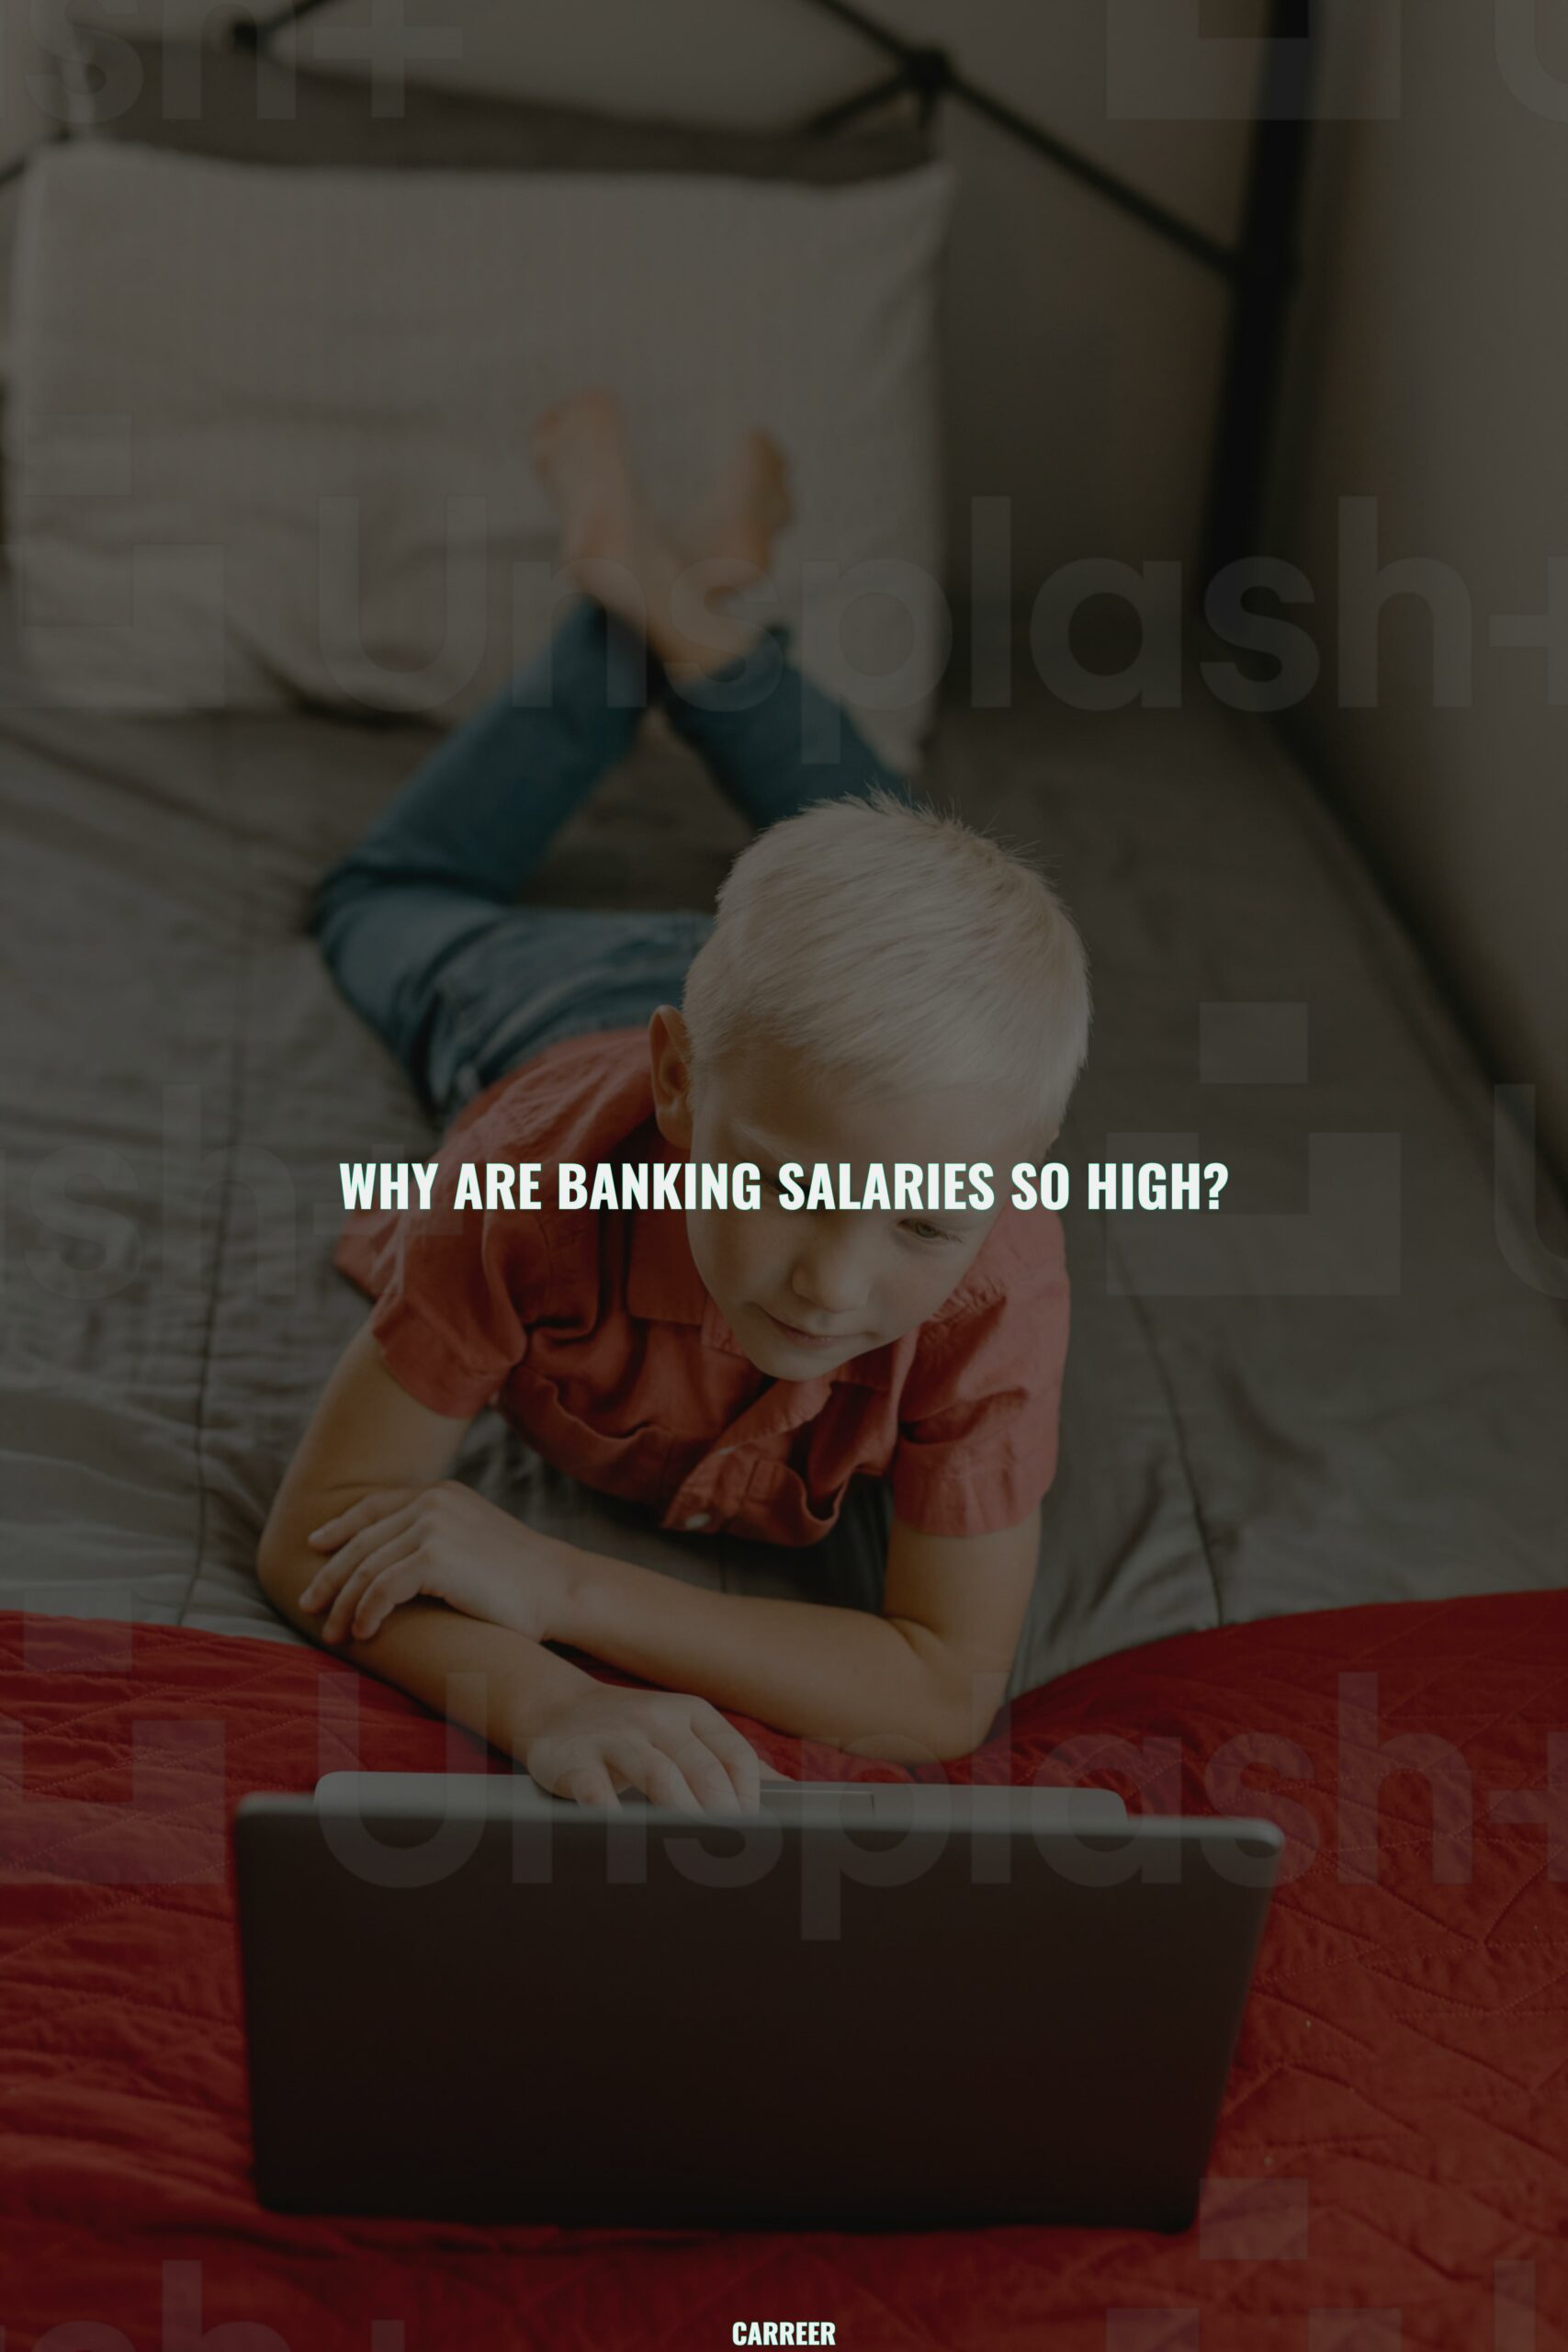 Why are banking salaries so high?